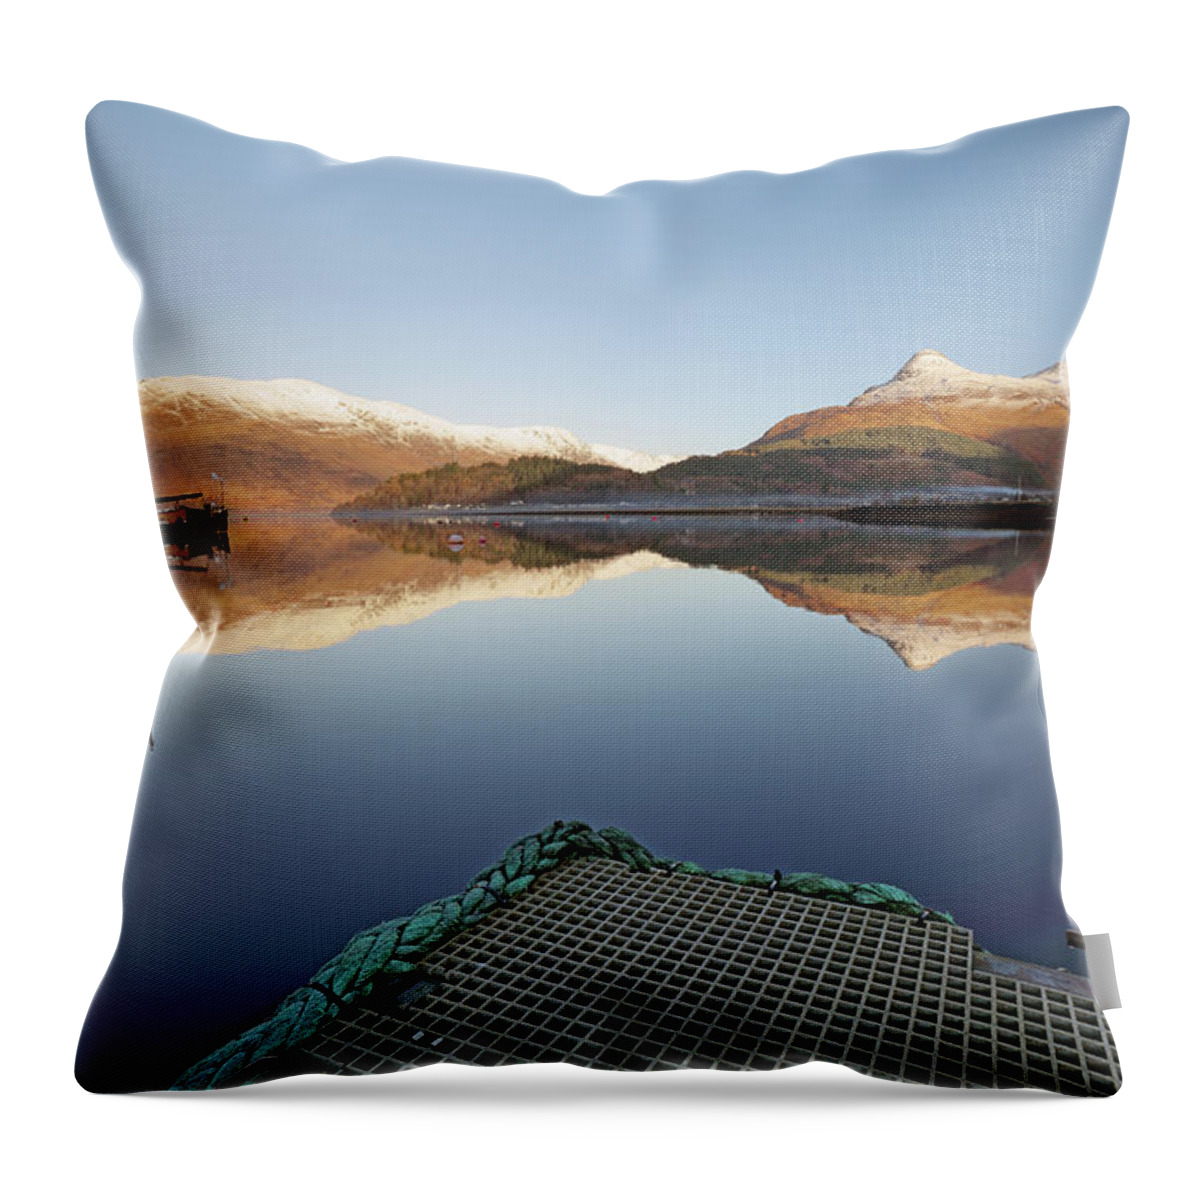 Winter In Glencoe Throw Pillow featuring the photograph Loch Leven Reflection by Grant Glendinning